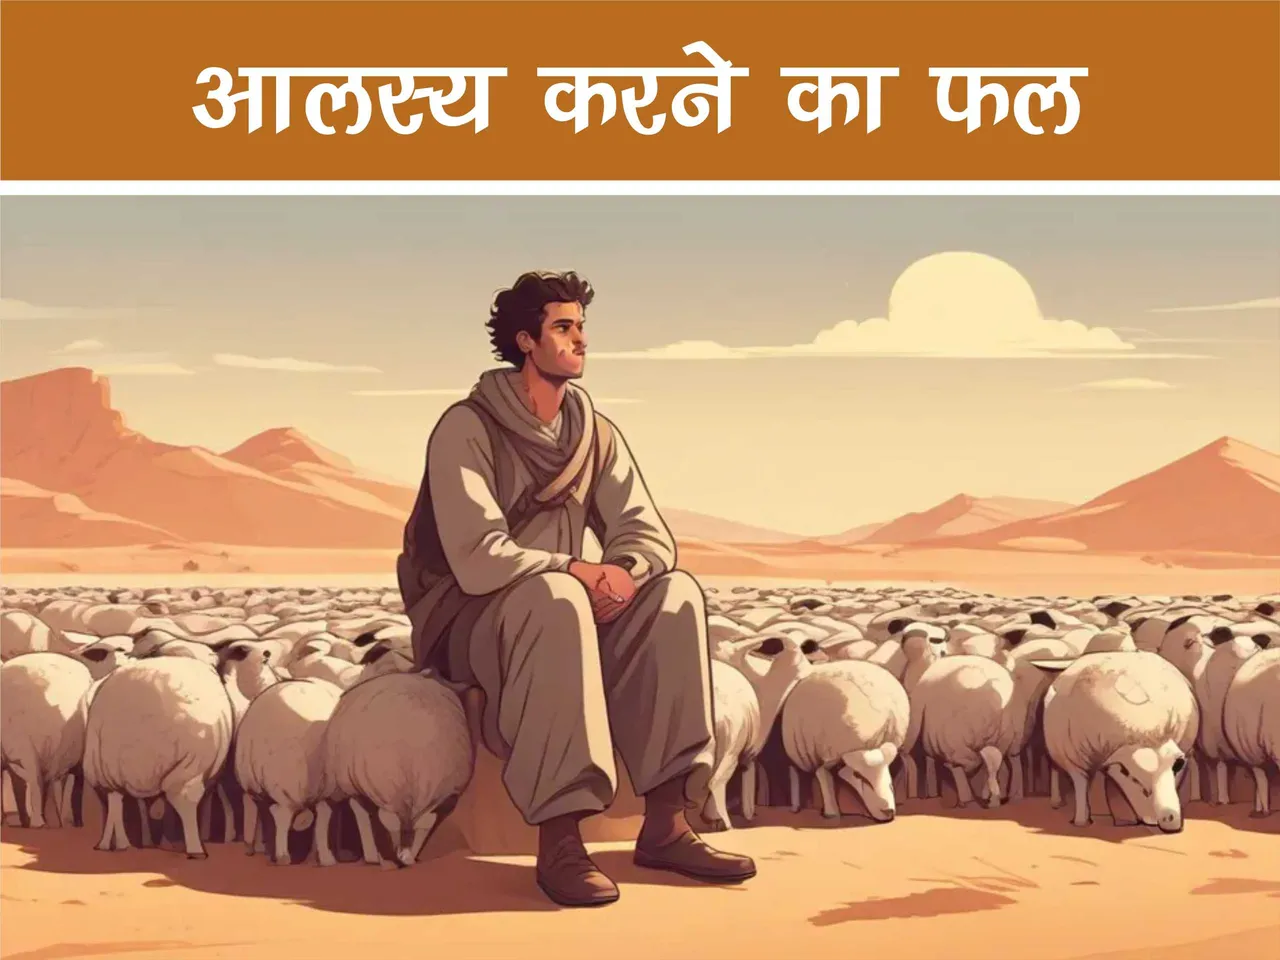 Shephered in desert with his sheeps